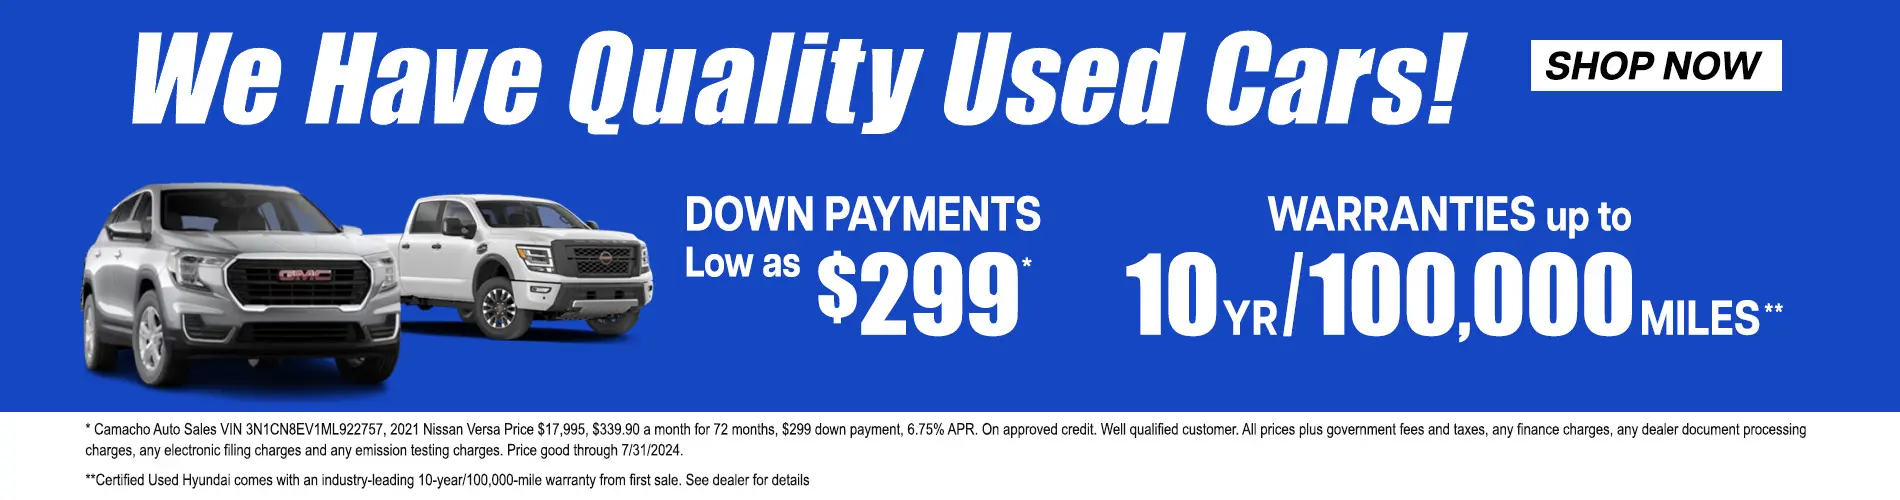 We have quality used cars - Down payments as low as $299* - Click for details